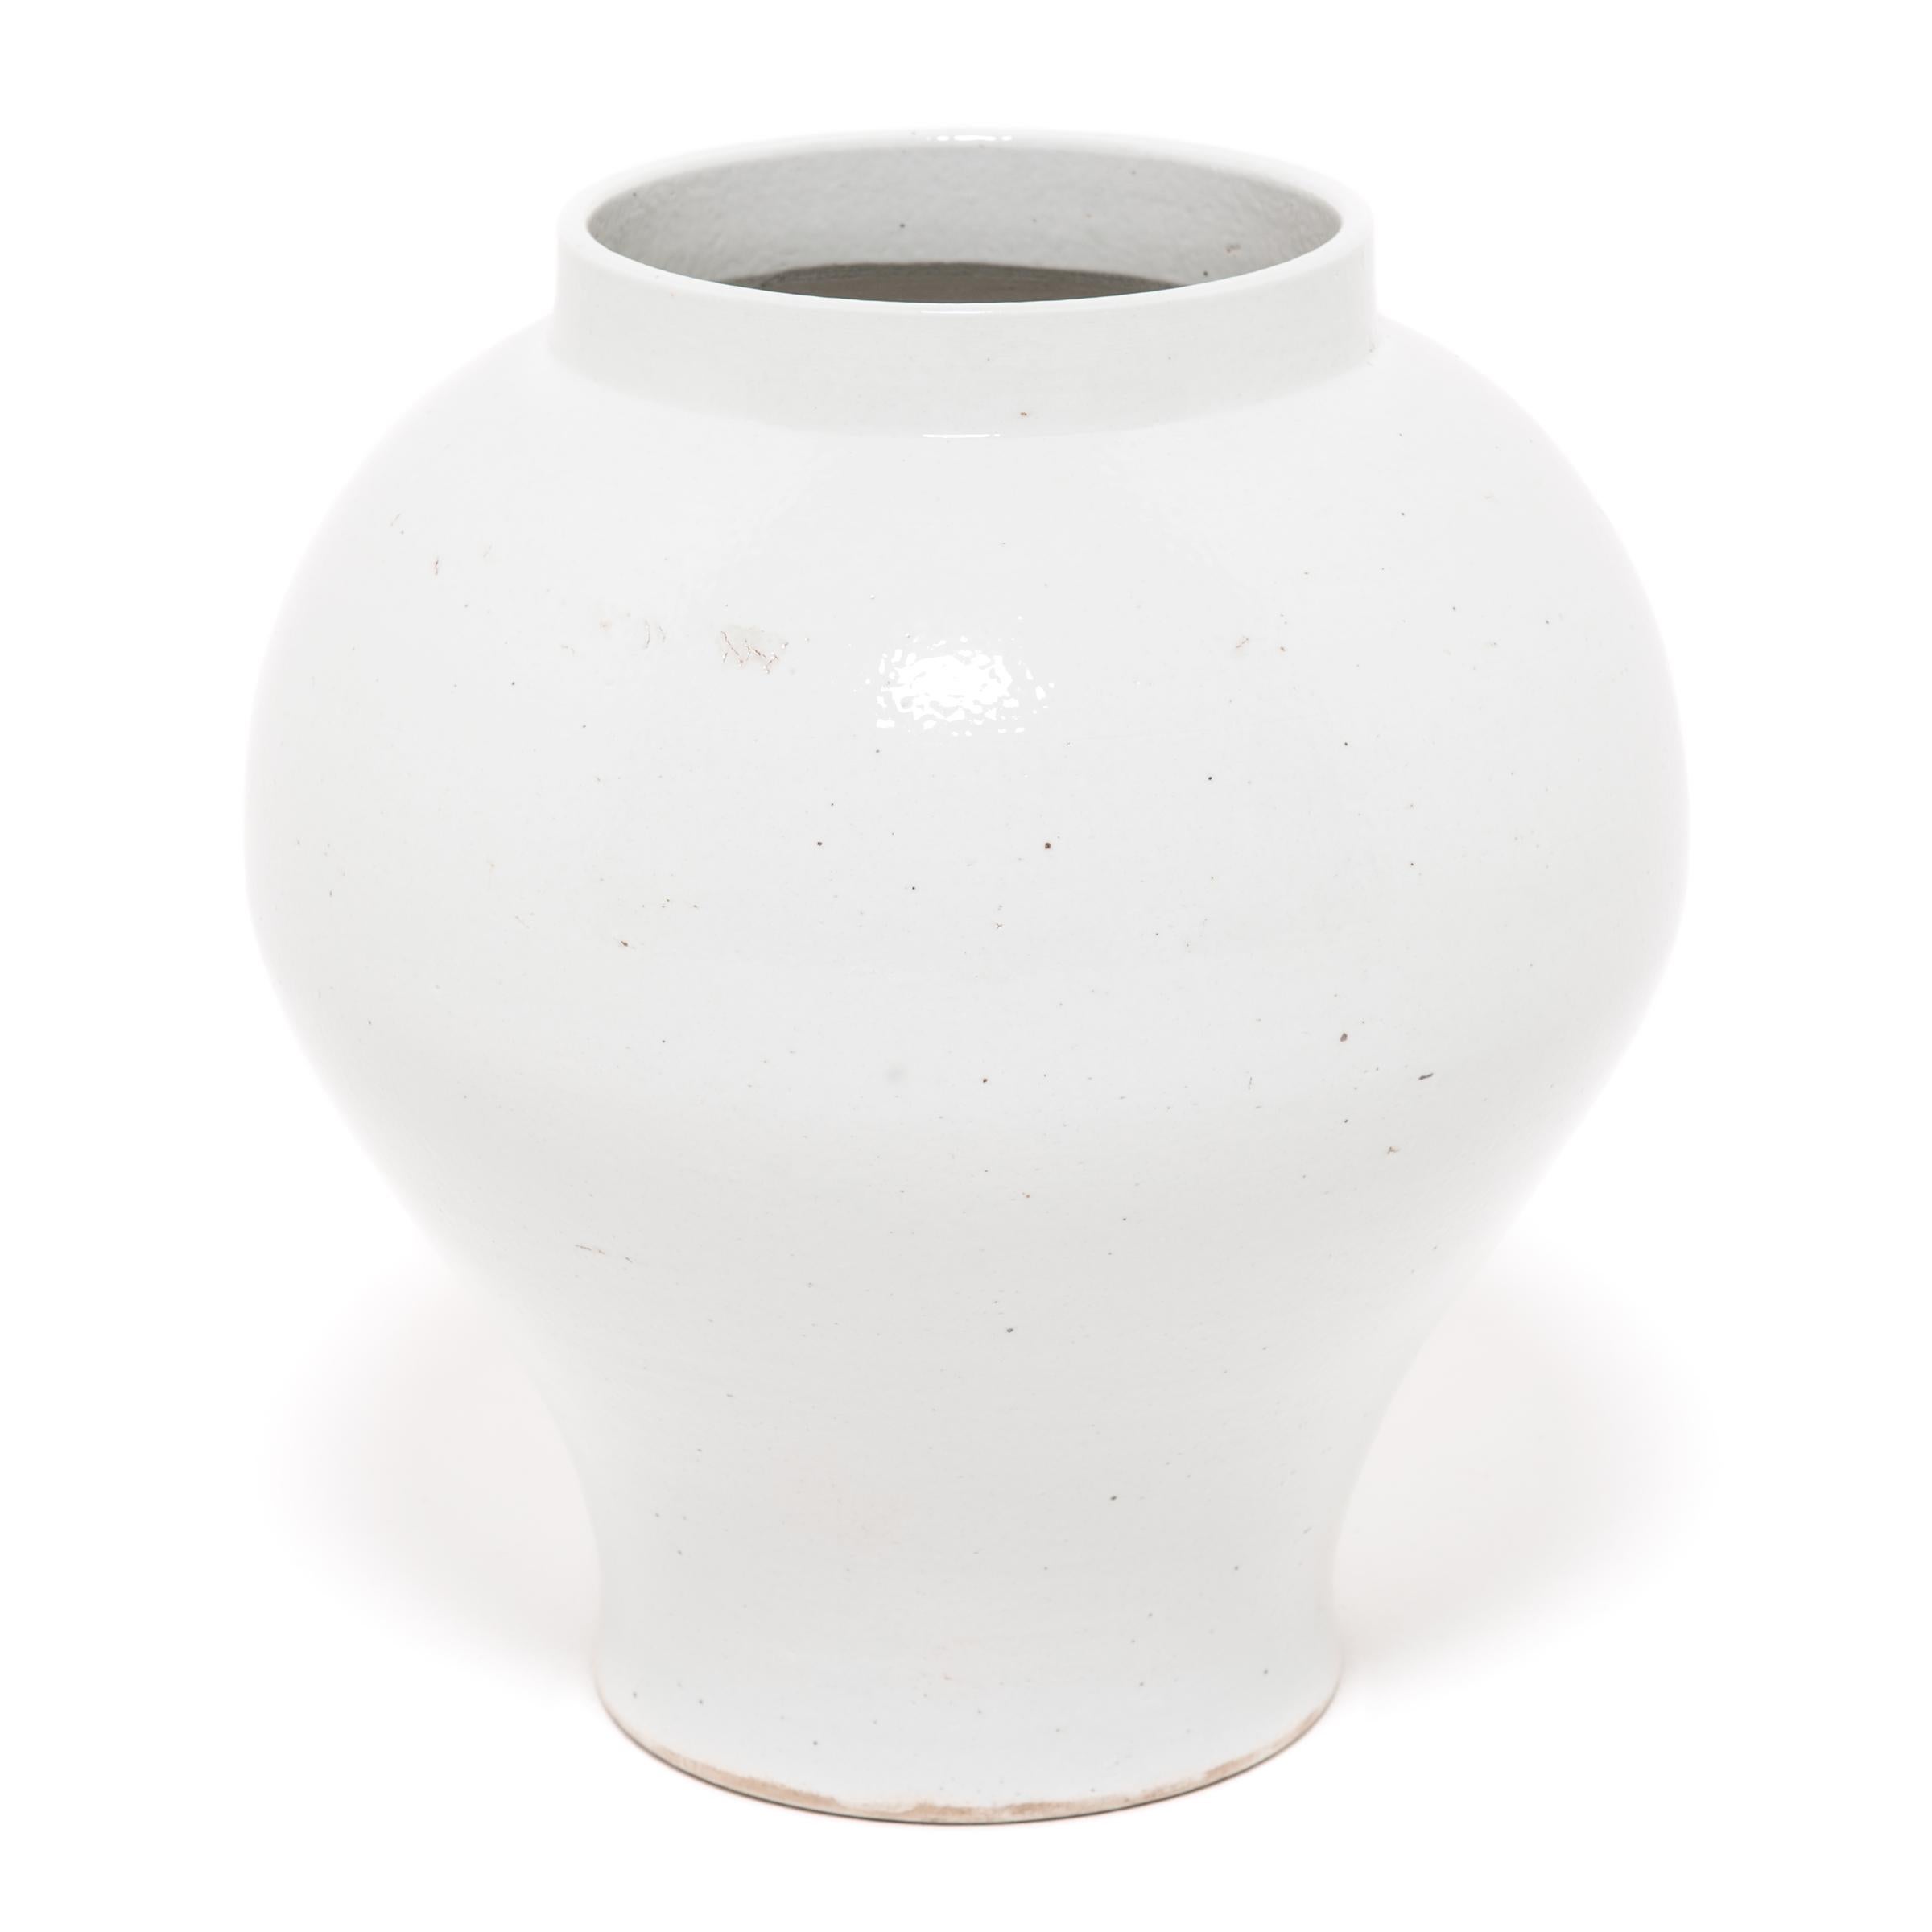 Drawing on a long Chinese tradition of monochrome ceramics, this large porcelain vase is glazed in serene, cloud-inspired white with celadon undertones. Sculpted by artisans in China's Zhejiang province, the vase has an impressive sculptural form